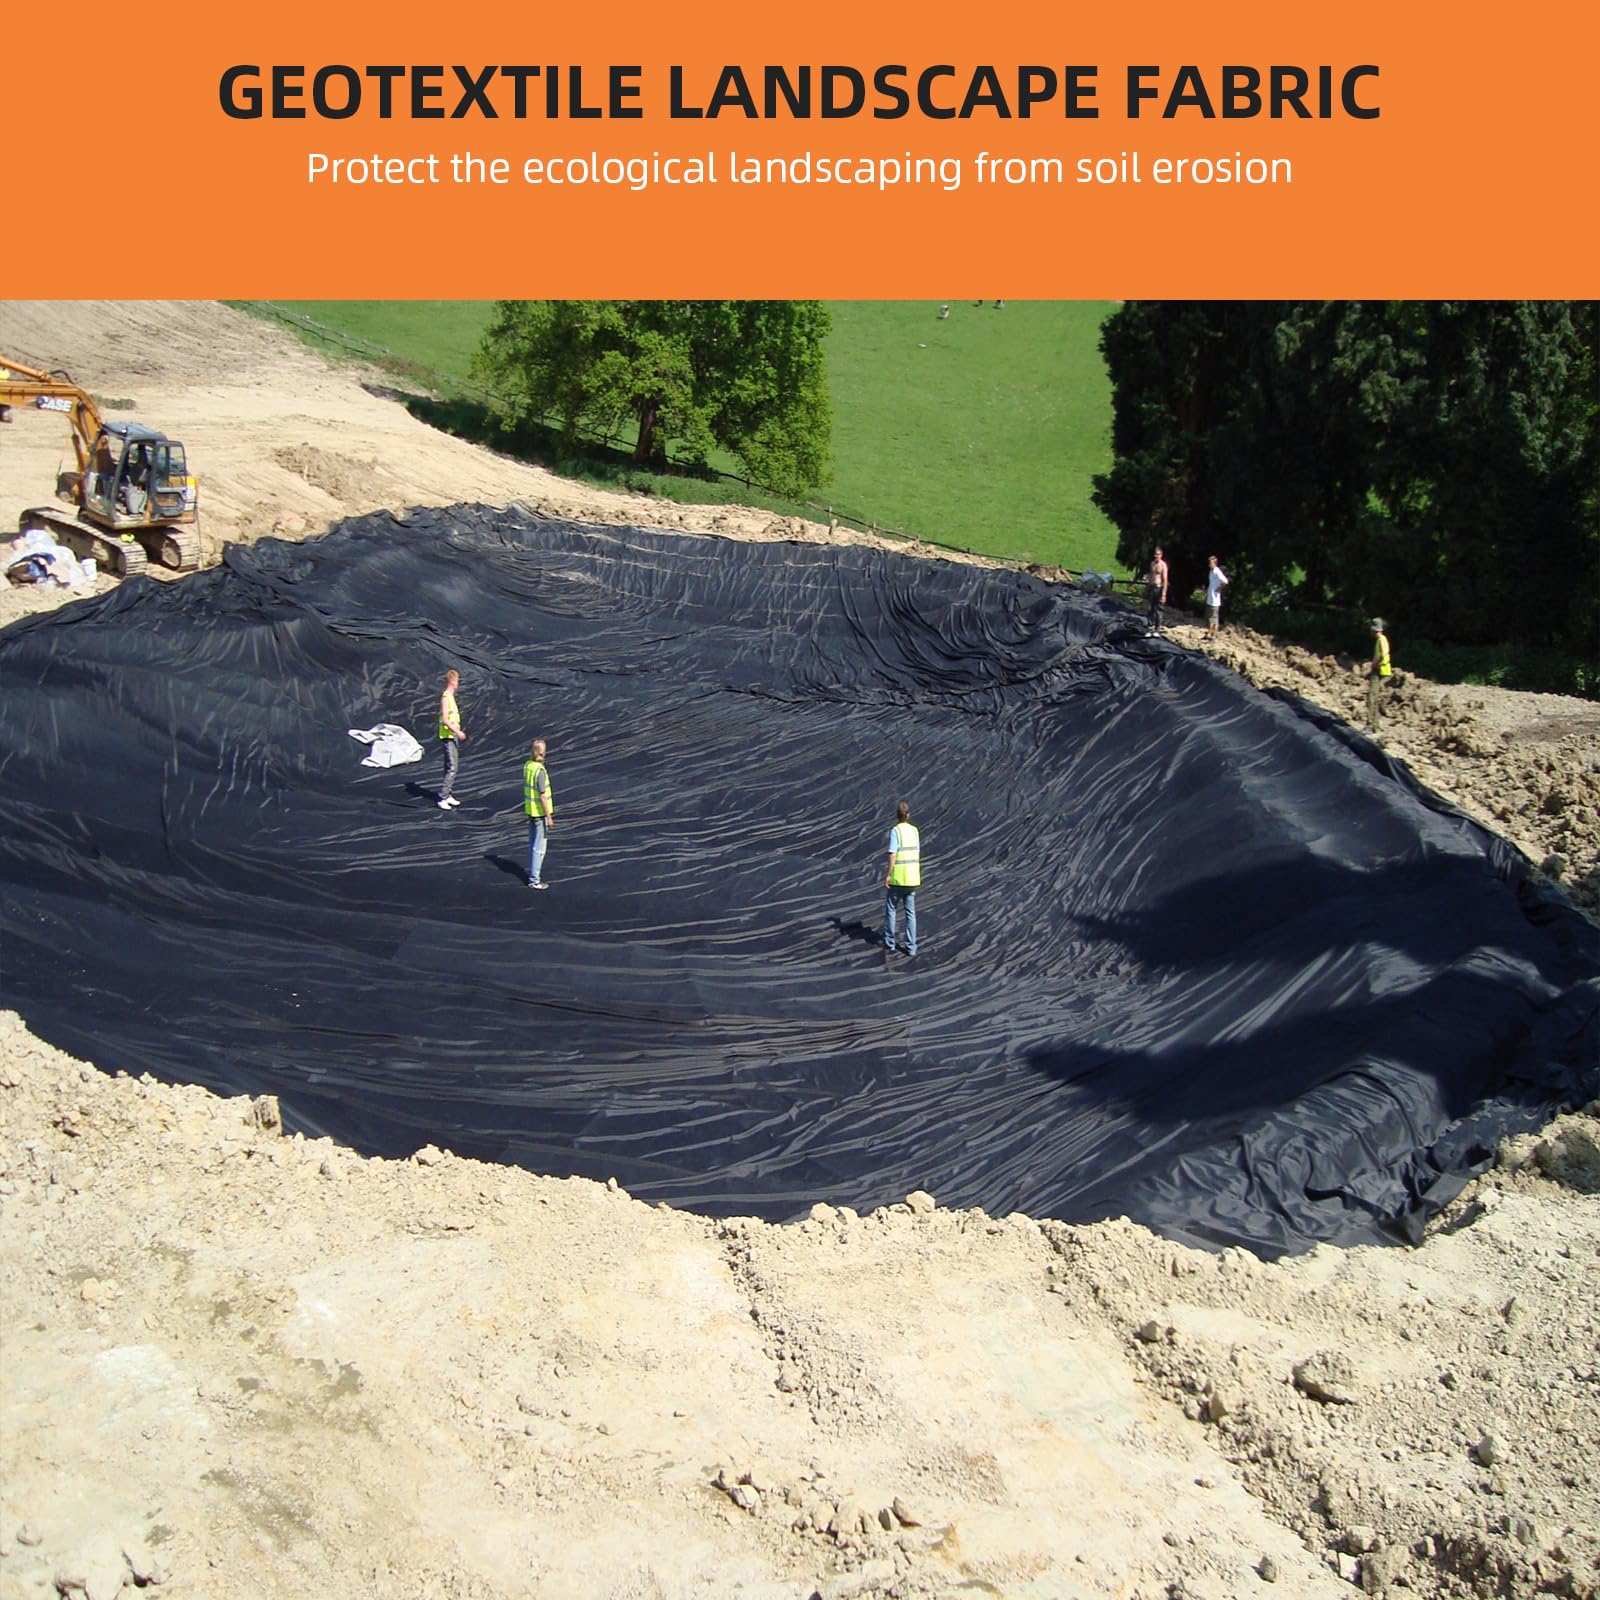 6oz 4ftx50ft PP Geotextile Drainage Fabric with 350N Tensile